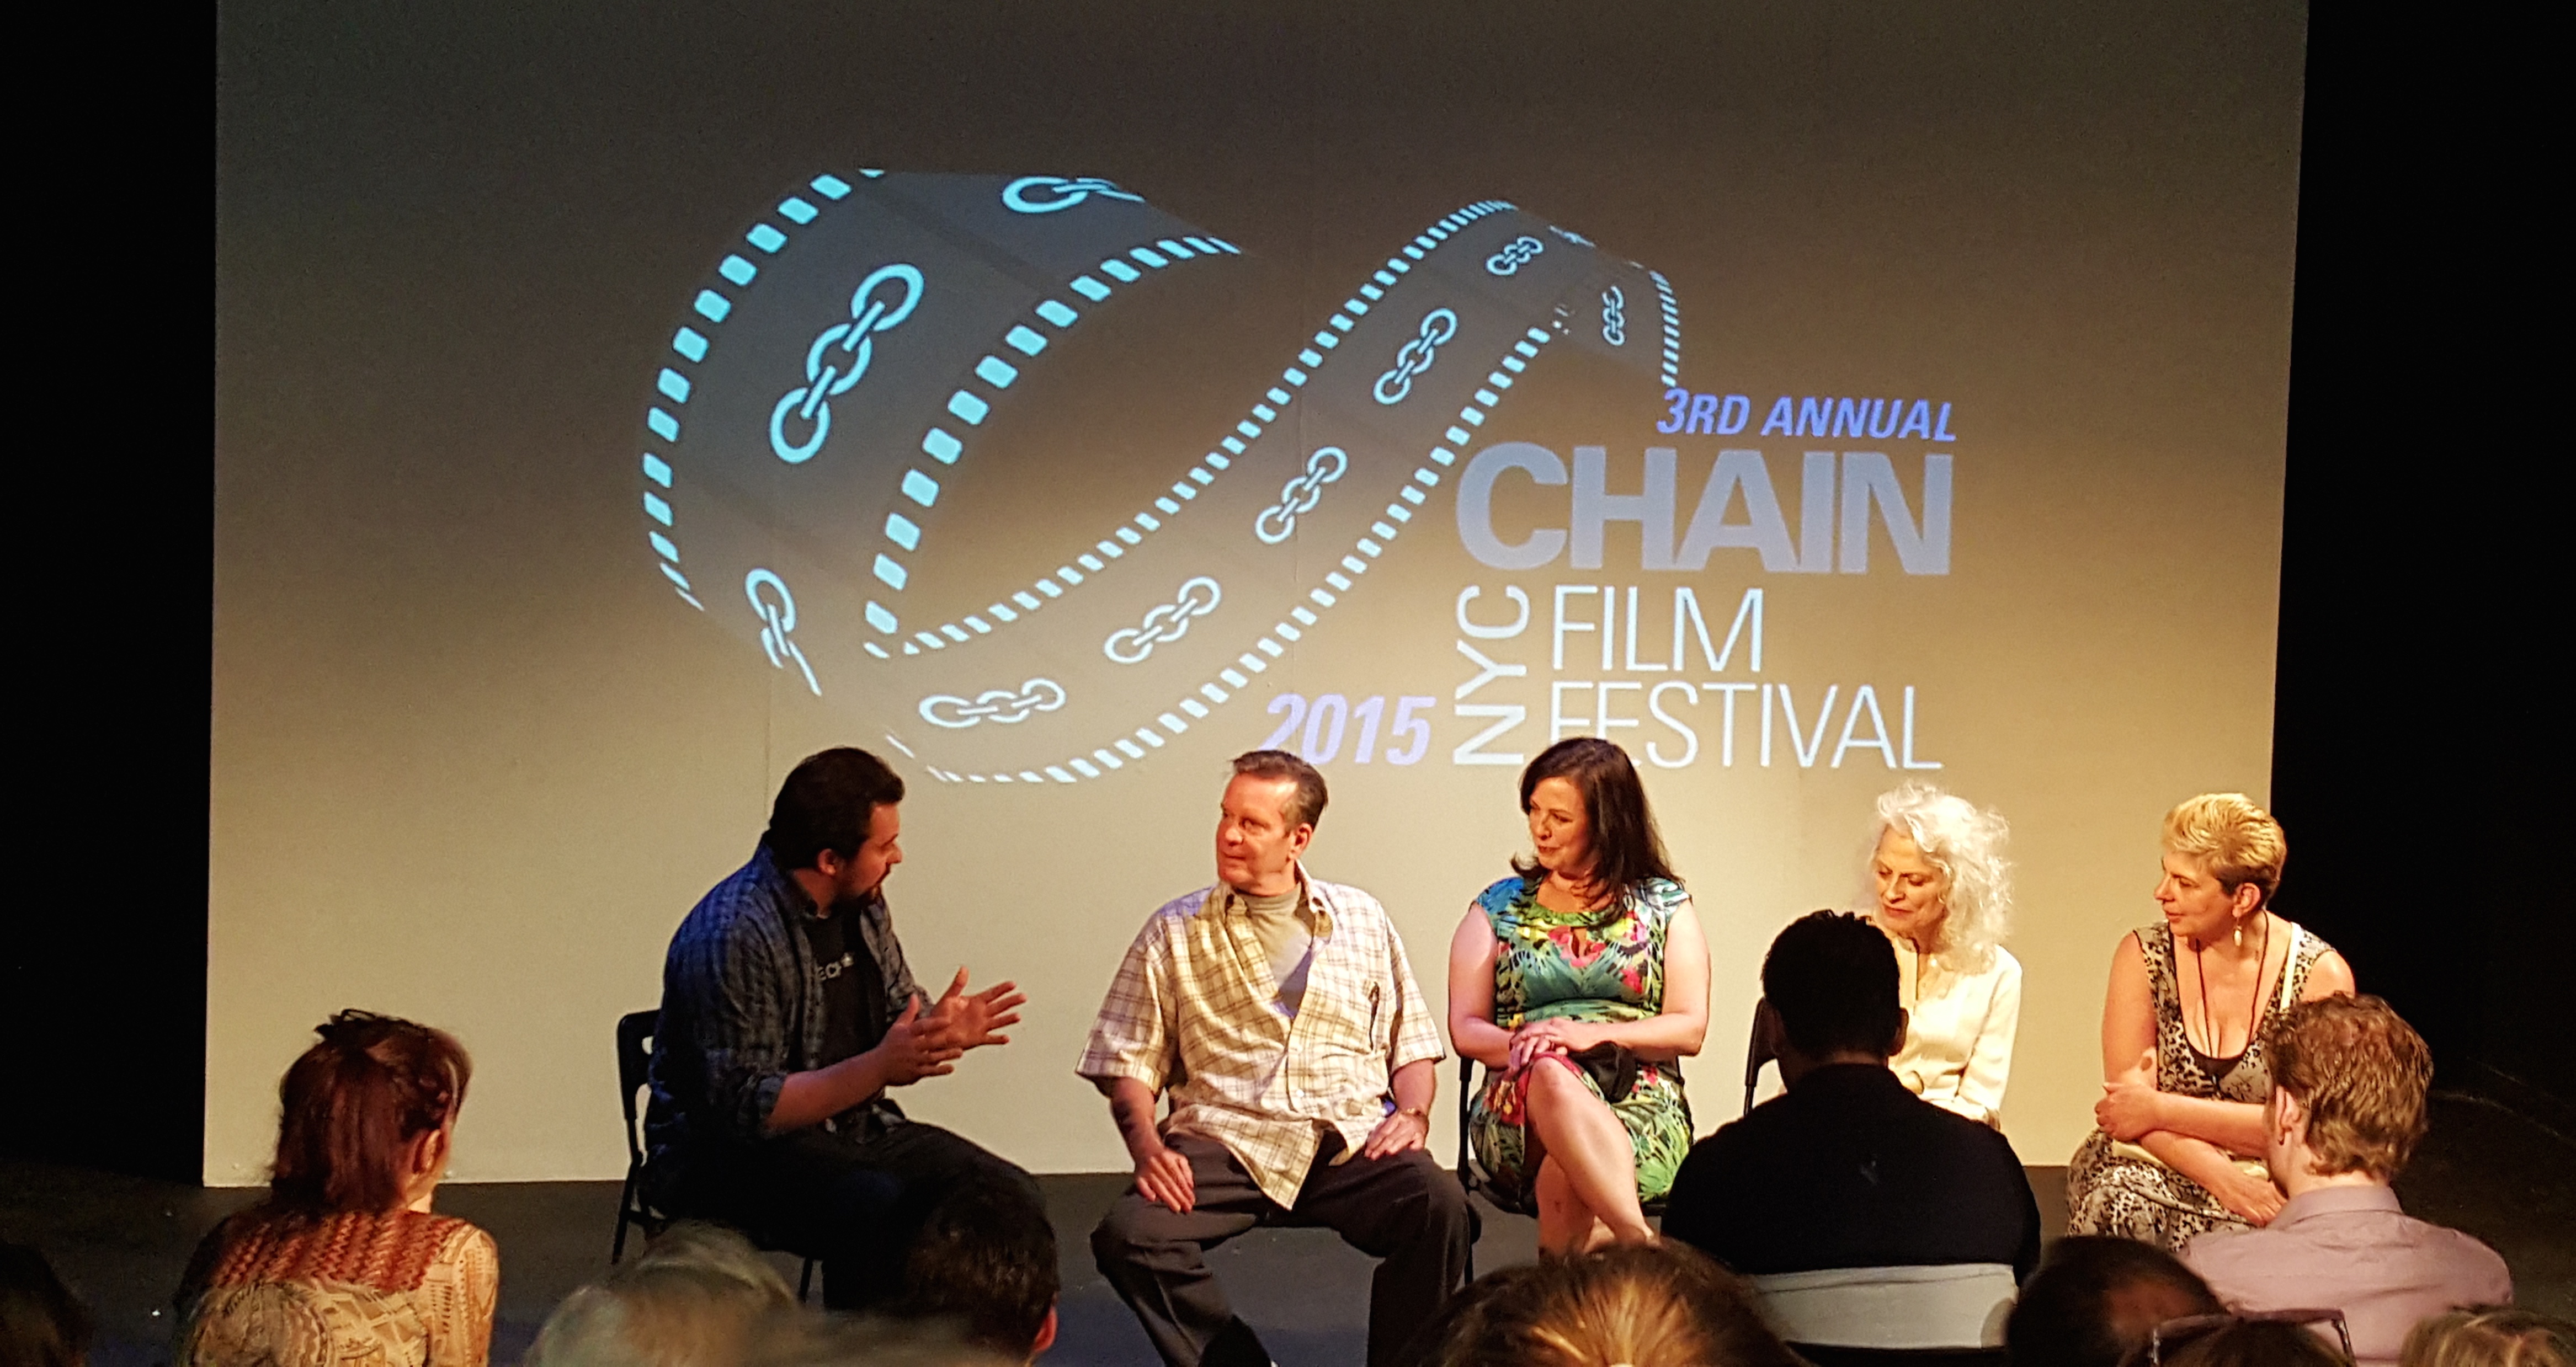 August 9, 2015, Q&A at the Chain NYC Film Festival for 